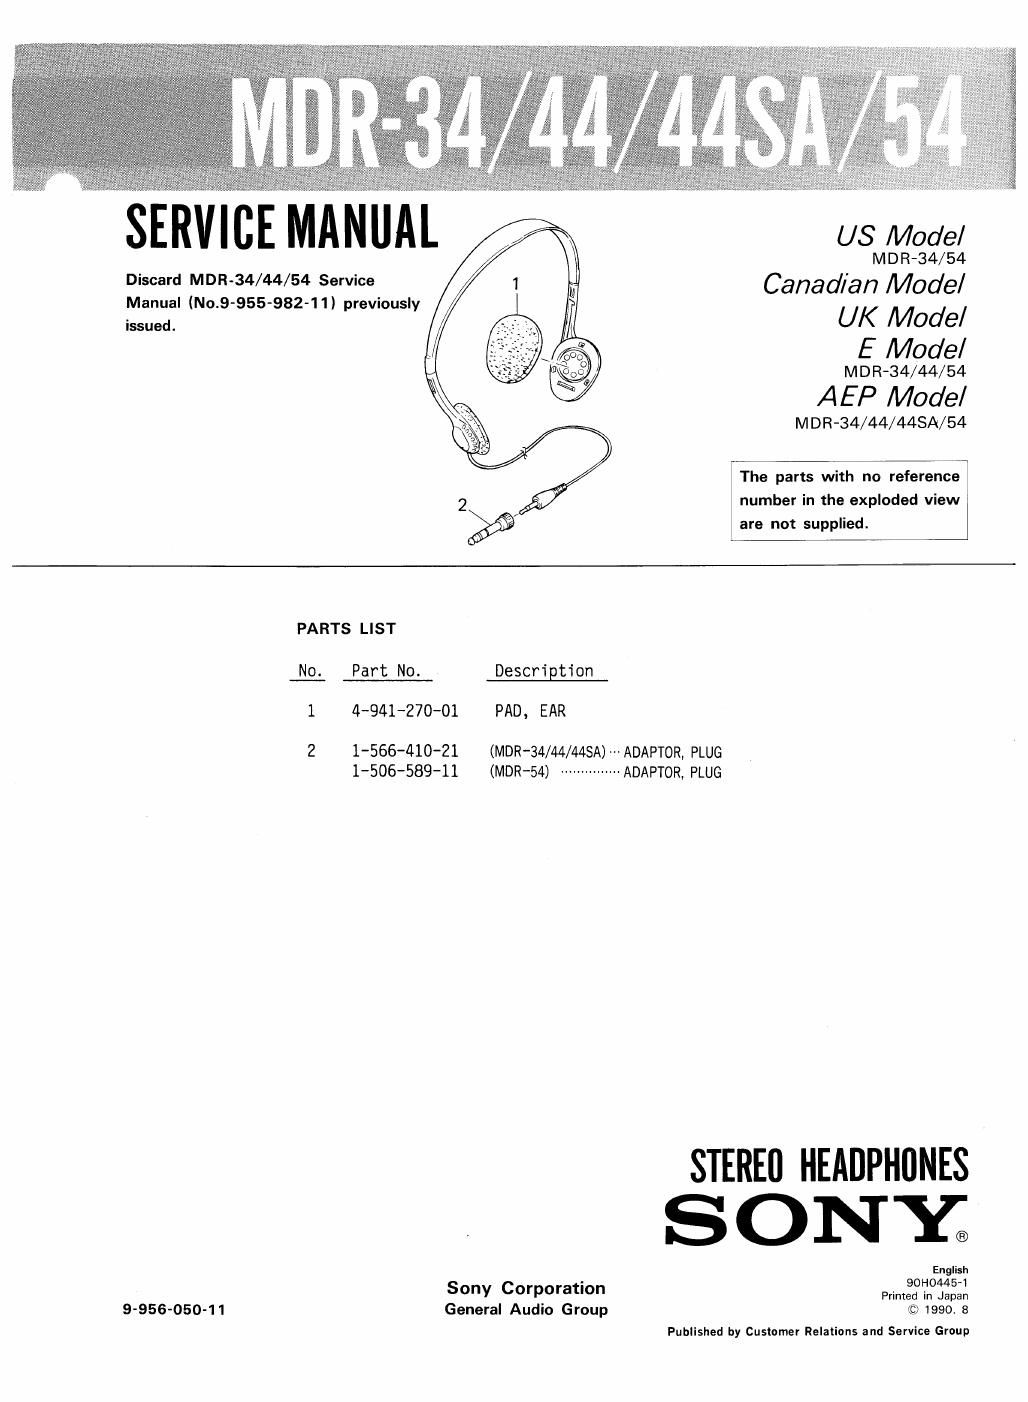 sony mdr 34 service manual